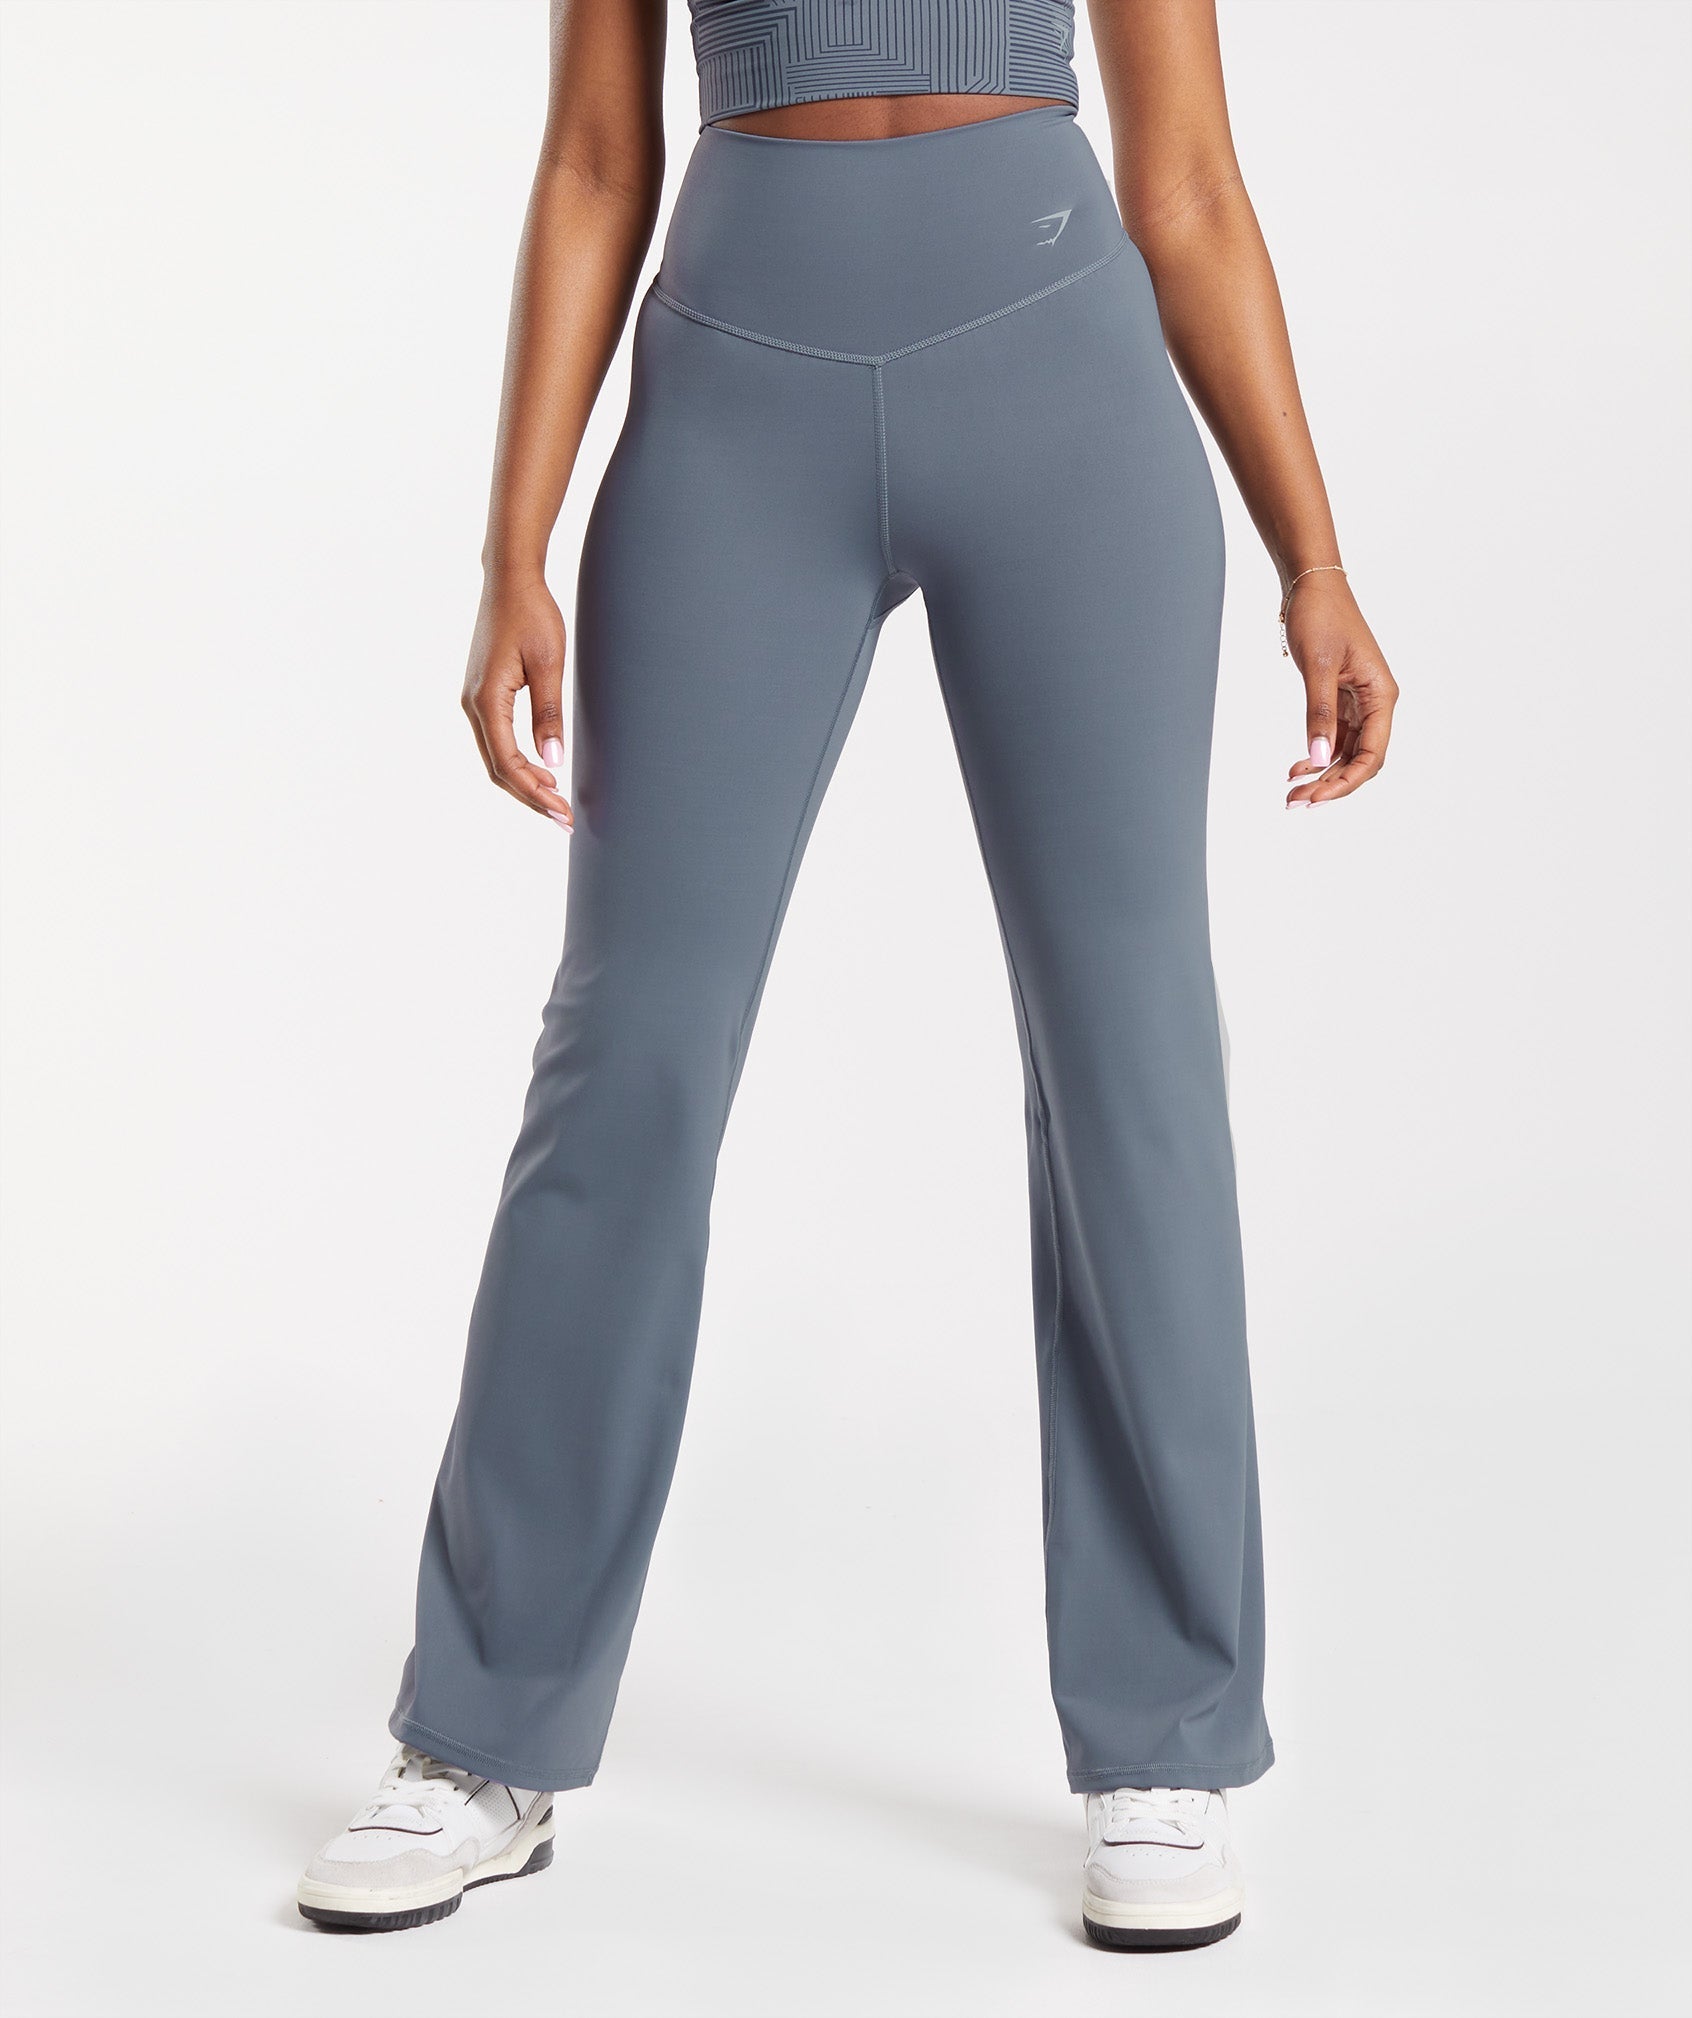 Elevate Flared Leggings in Evening Blue is out of stock